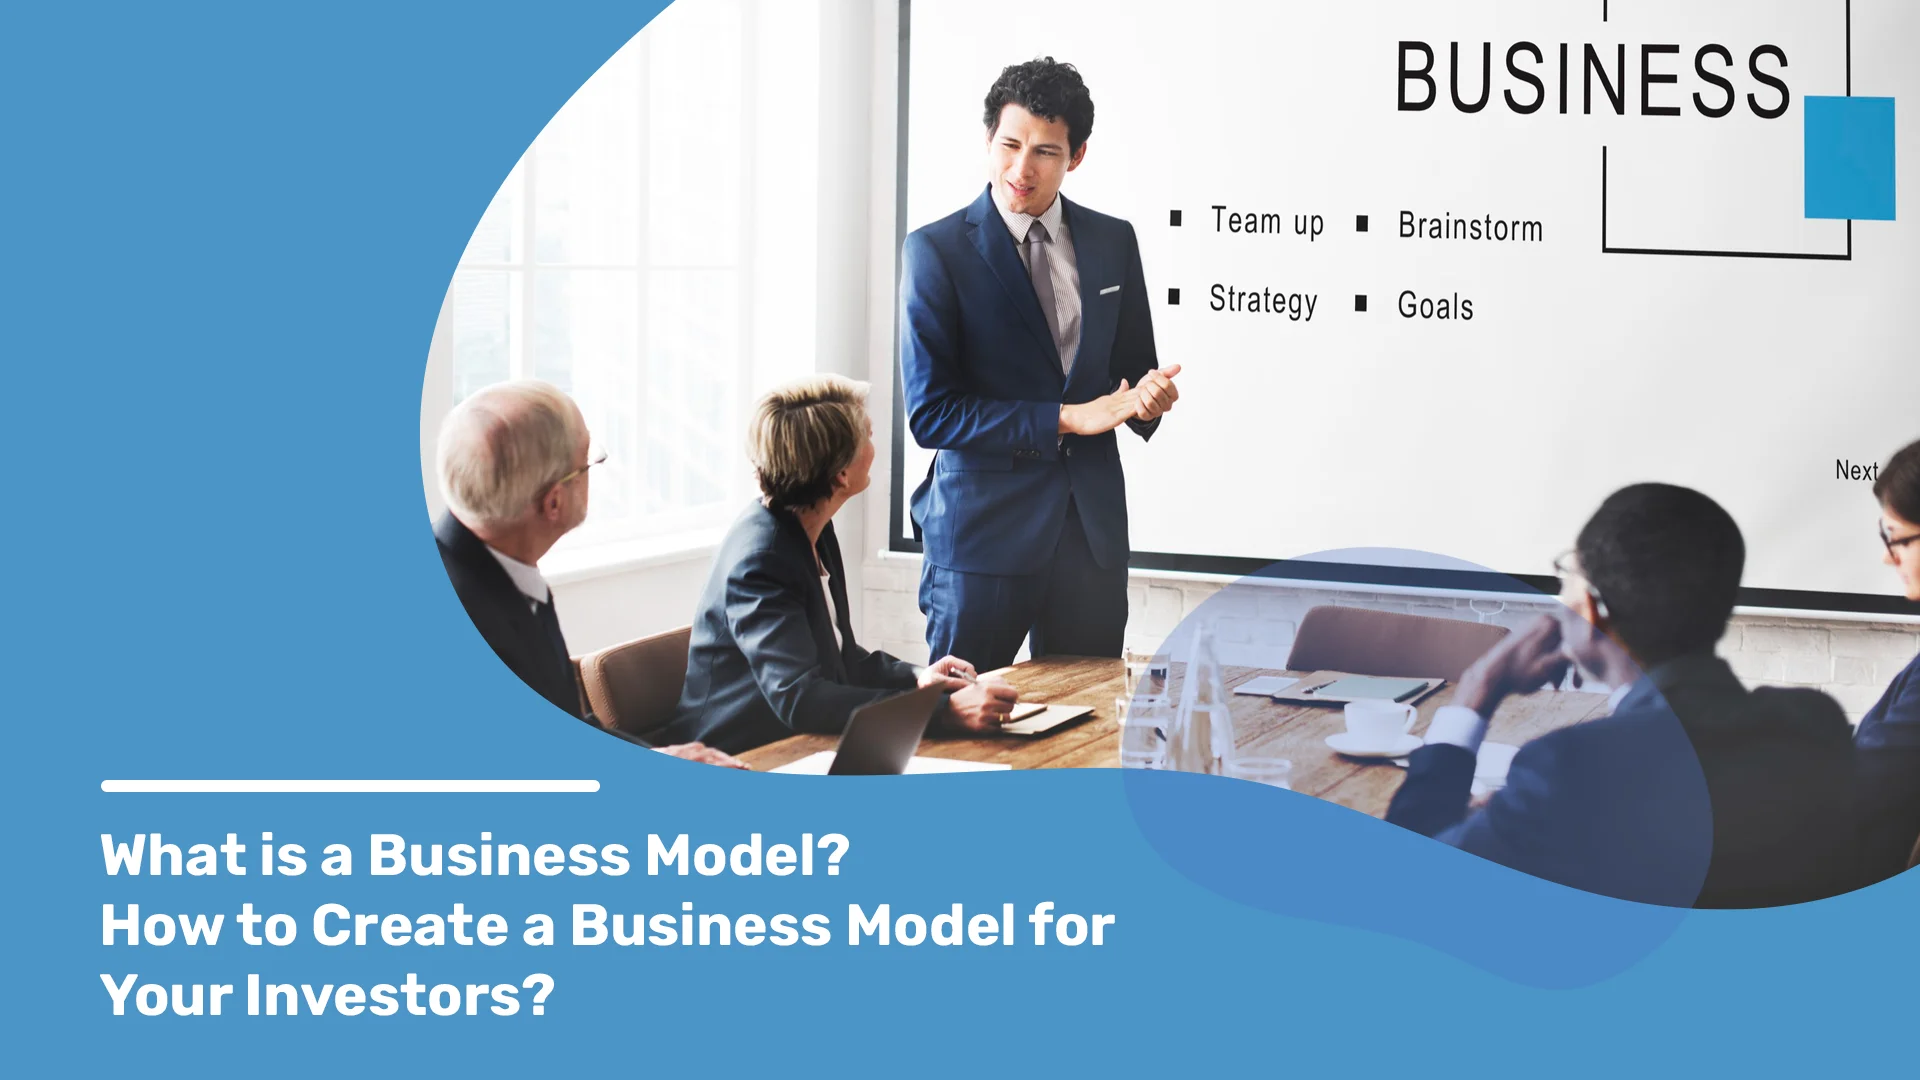 A professional is elucidating their business model to stakeholders through a well-structured and comprehensive presentation.